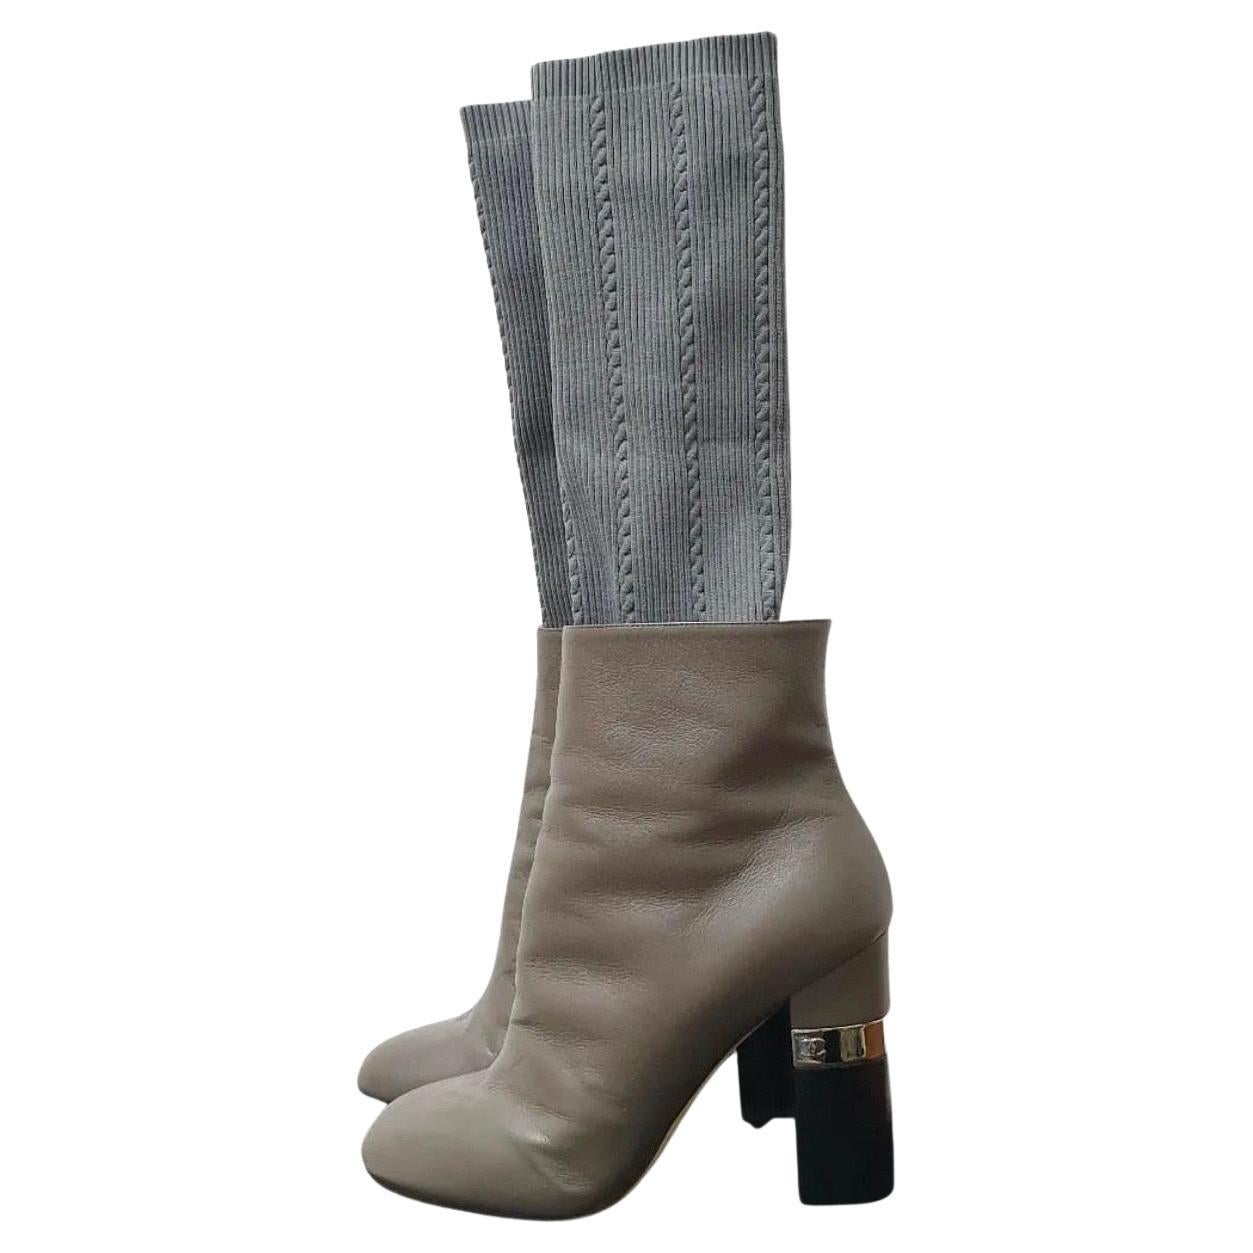 Chanel Leather Texlile Socks Heeled Boots For Sale